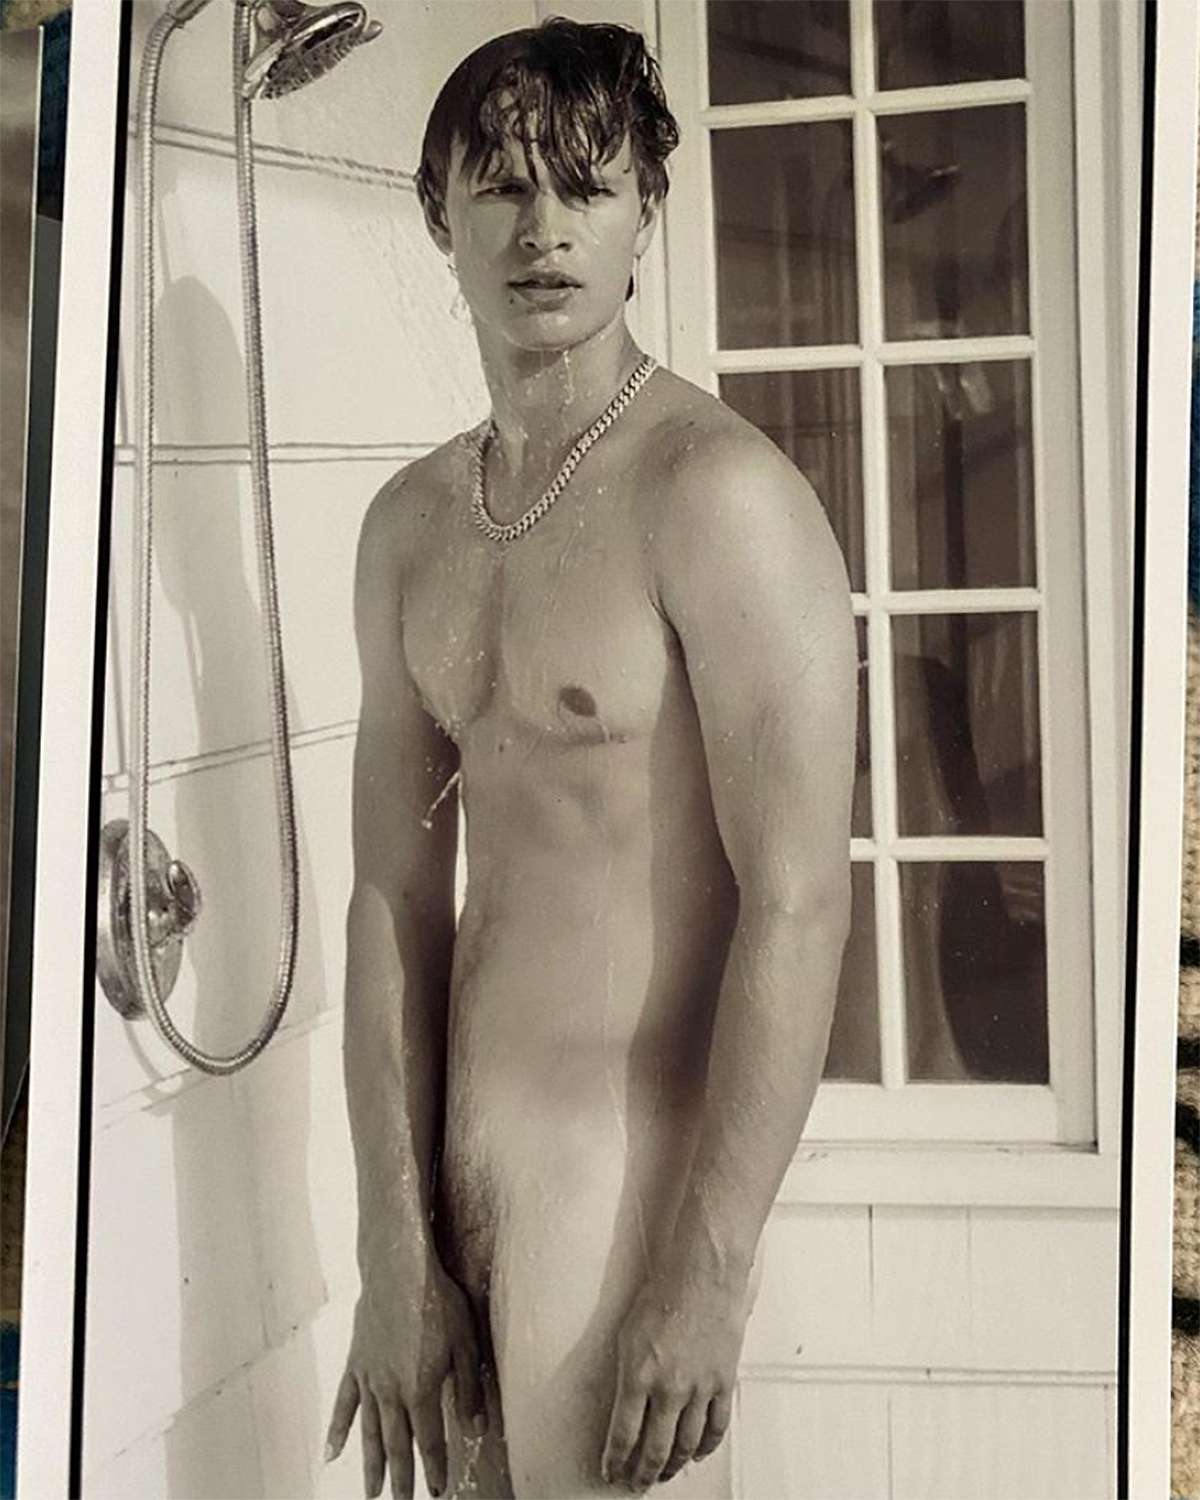 Ansel Elgort Nude And Great Bulge Photos - Gay-Male-Celebs.com